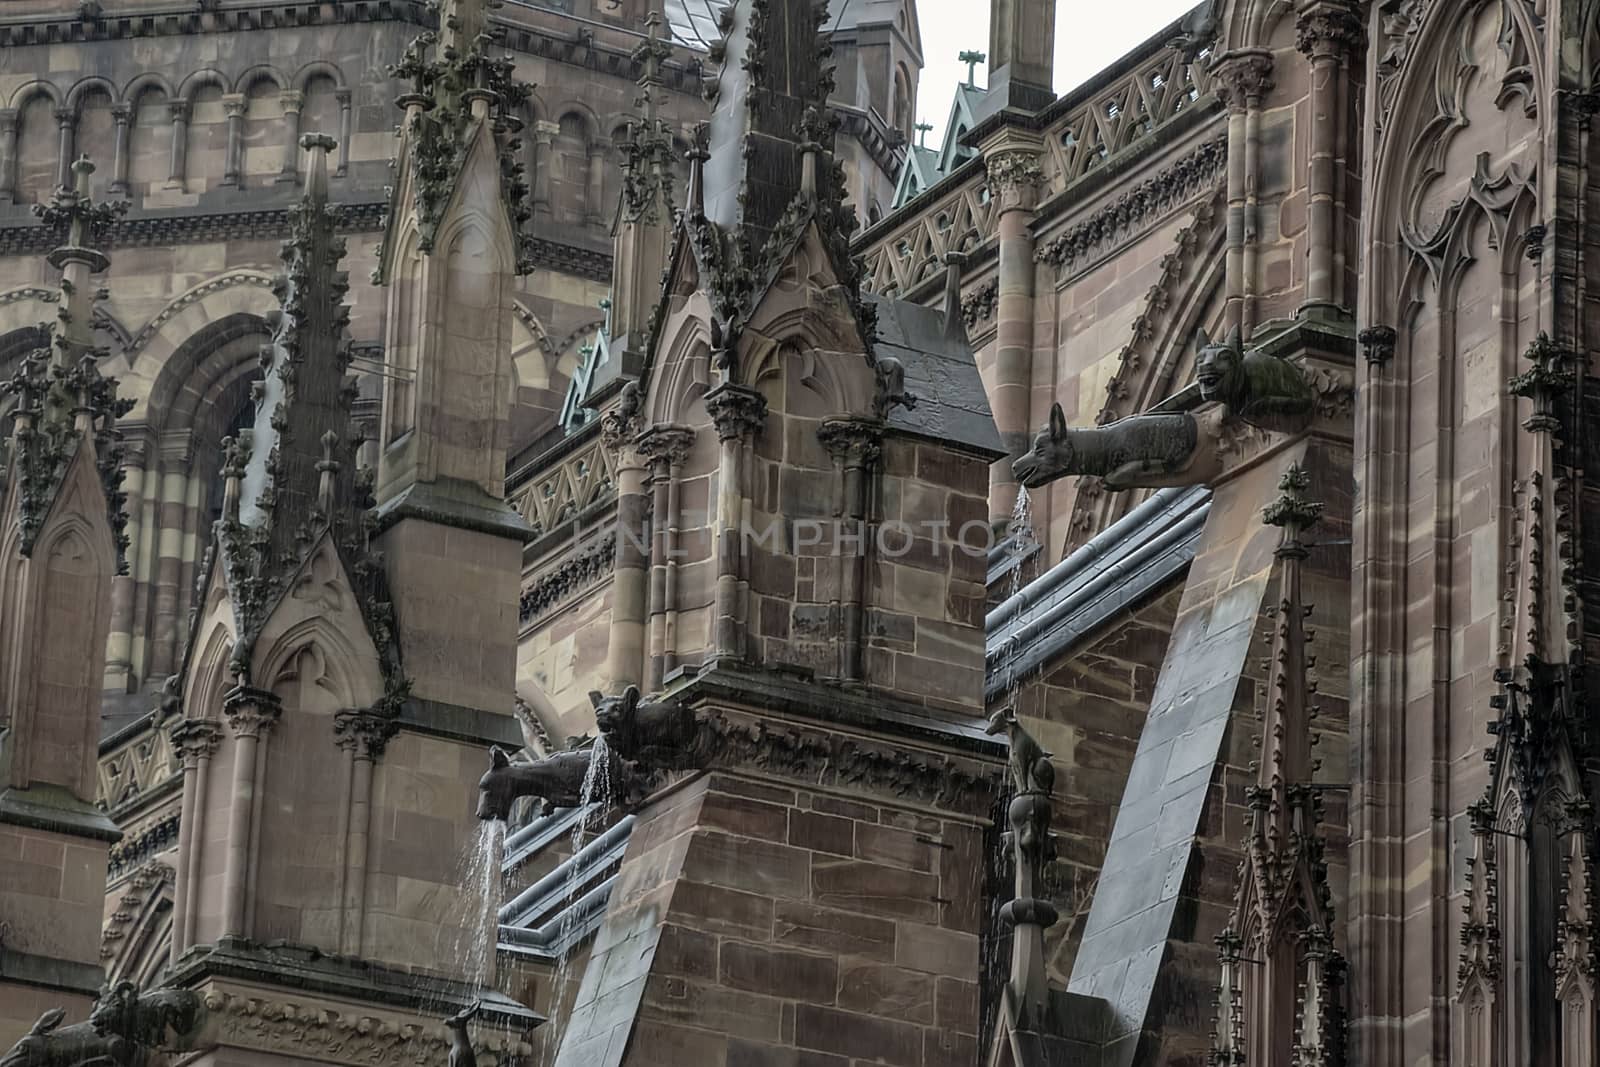 Spires of Strasbourg cathedral in heavy rain by mrs_vision